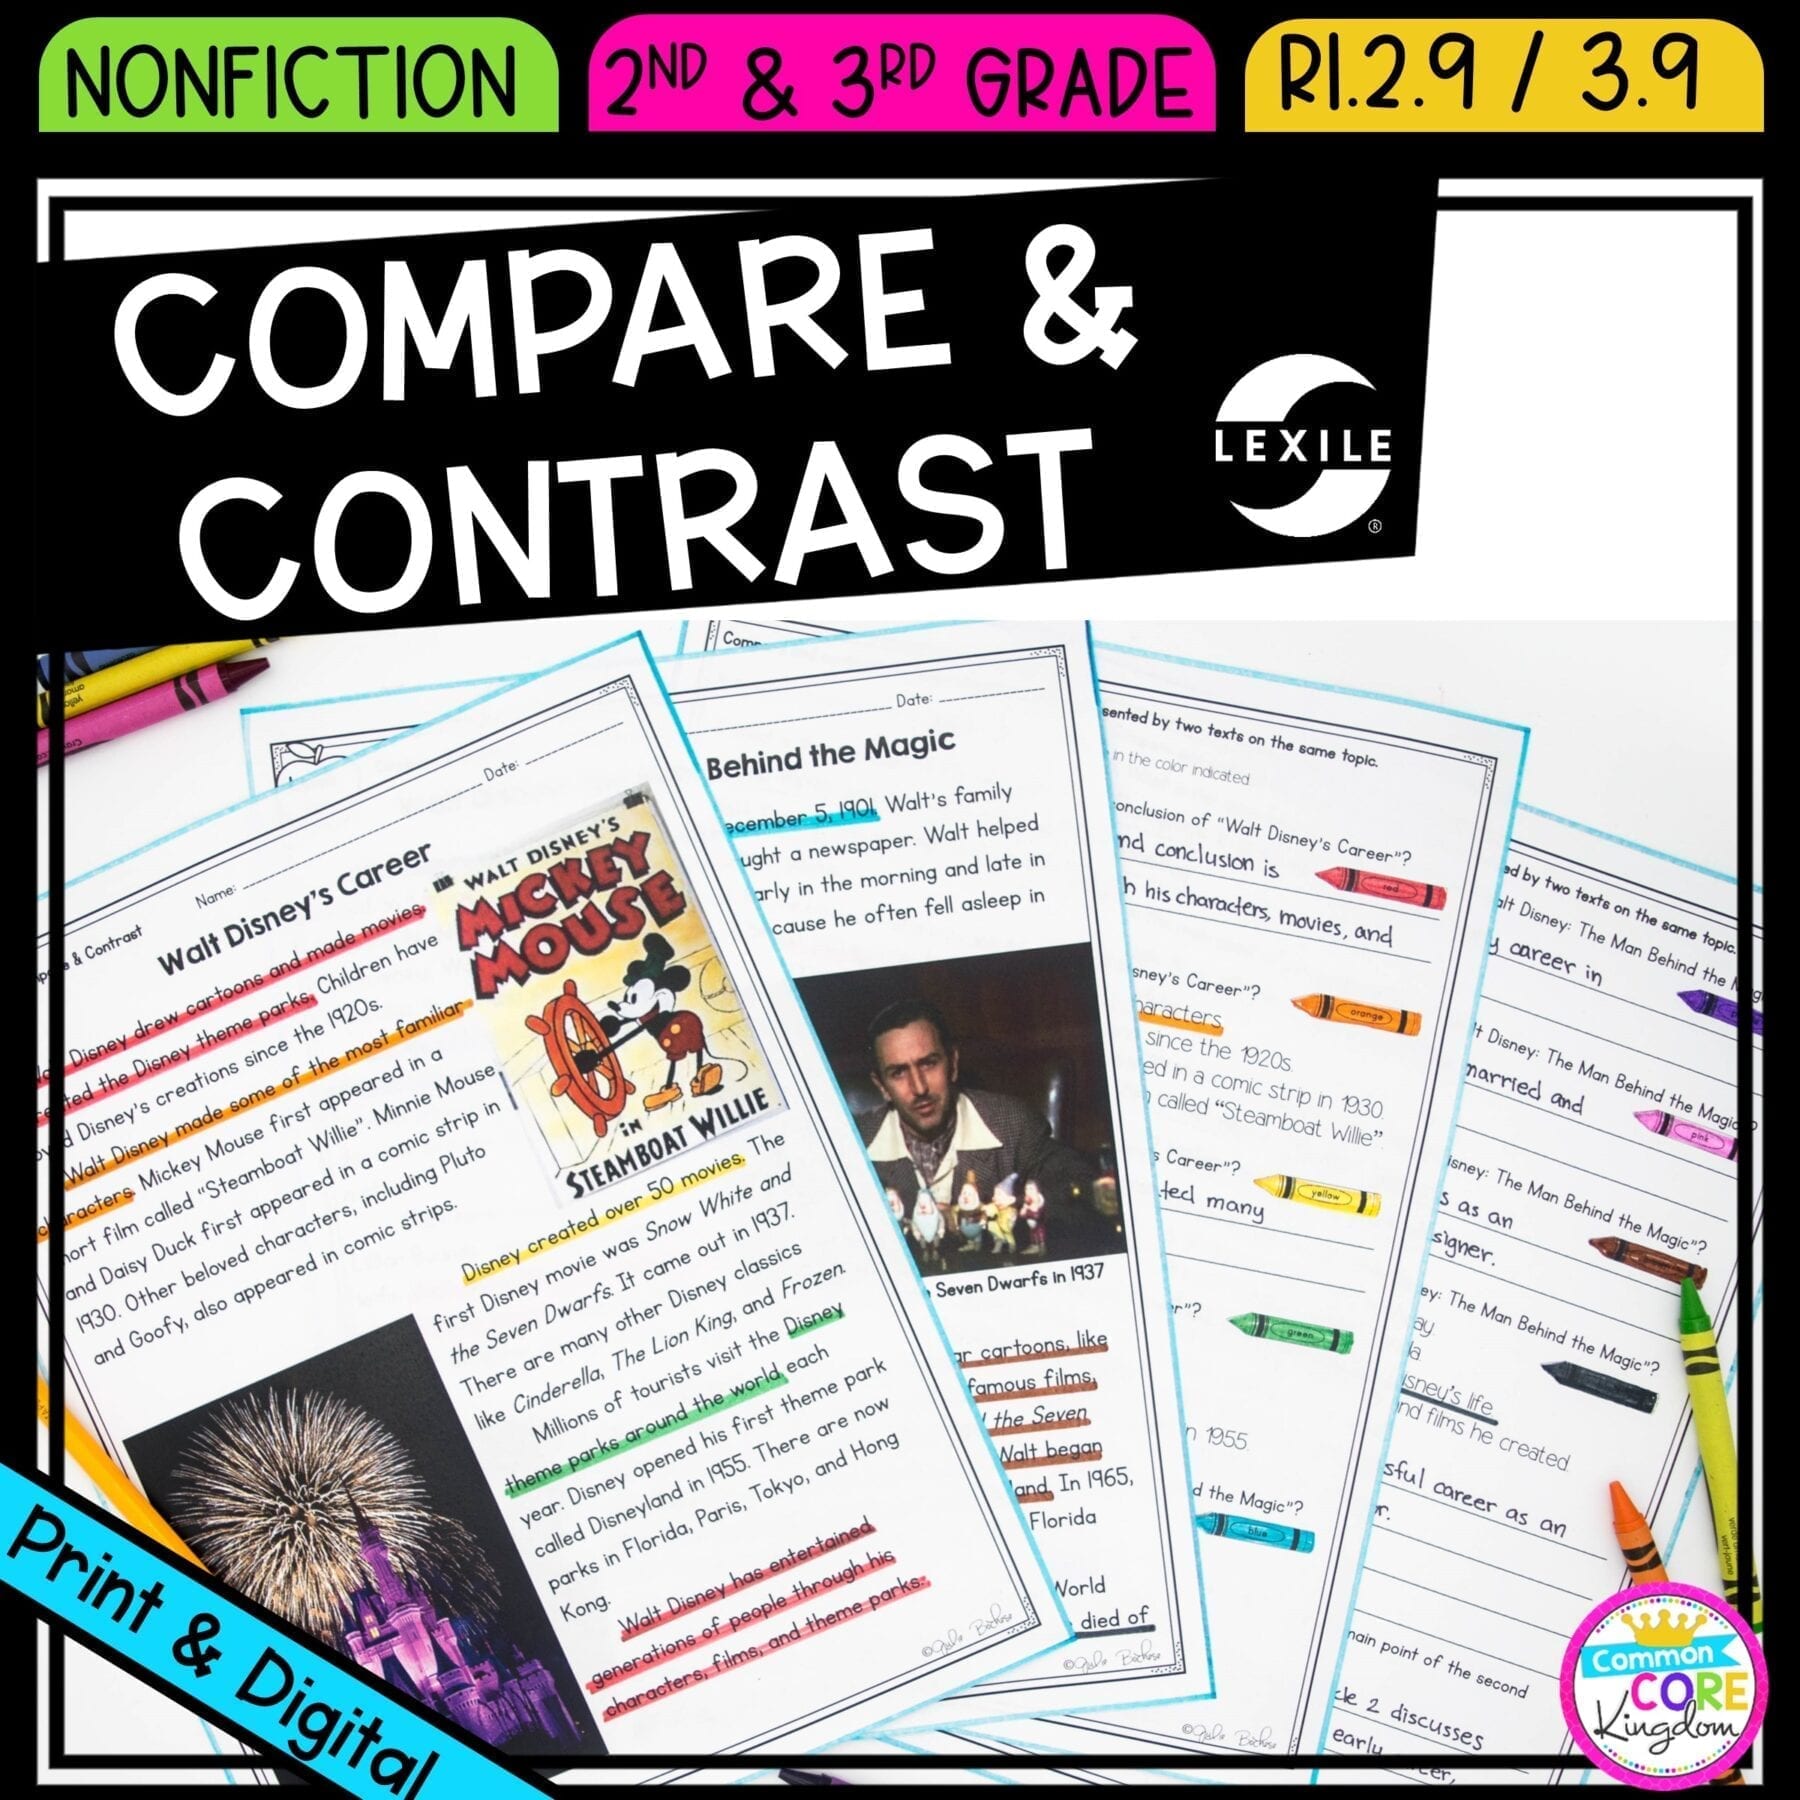 Compare & Contrast Informational Texts on the Same Topic for 2nd and 3rd grade cover showing printable and digital worksheets